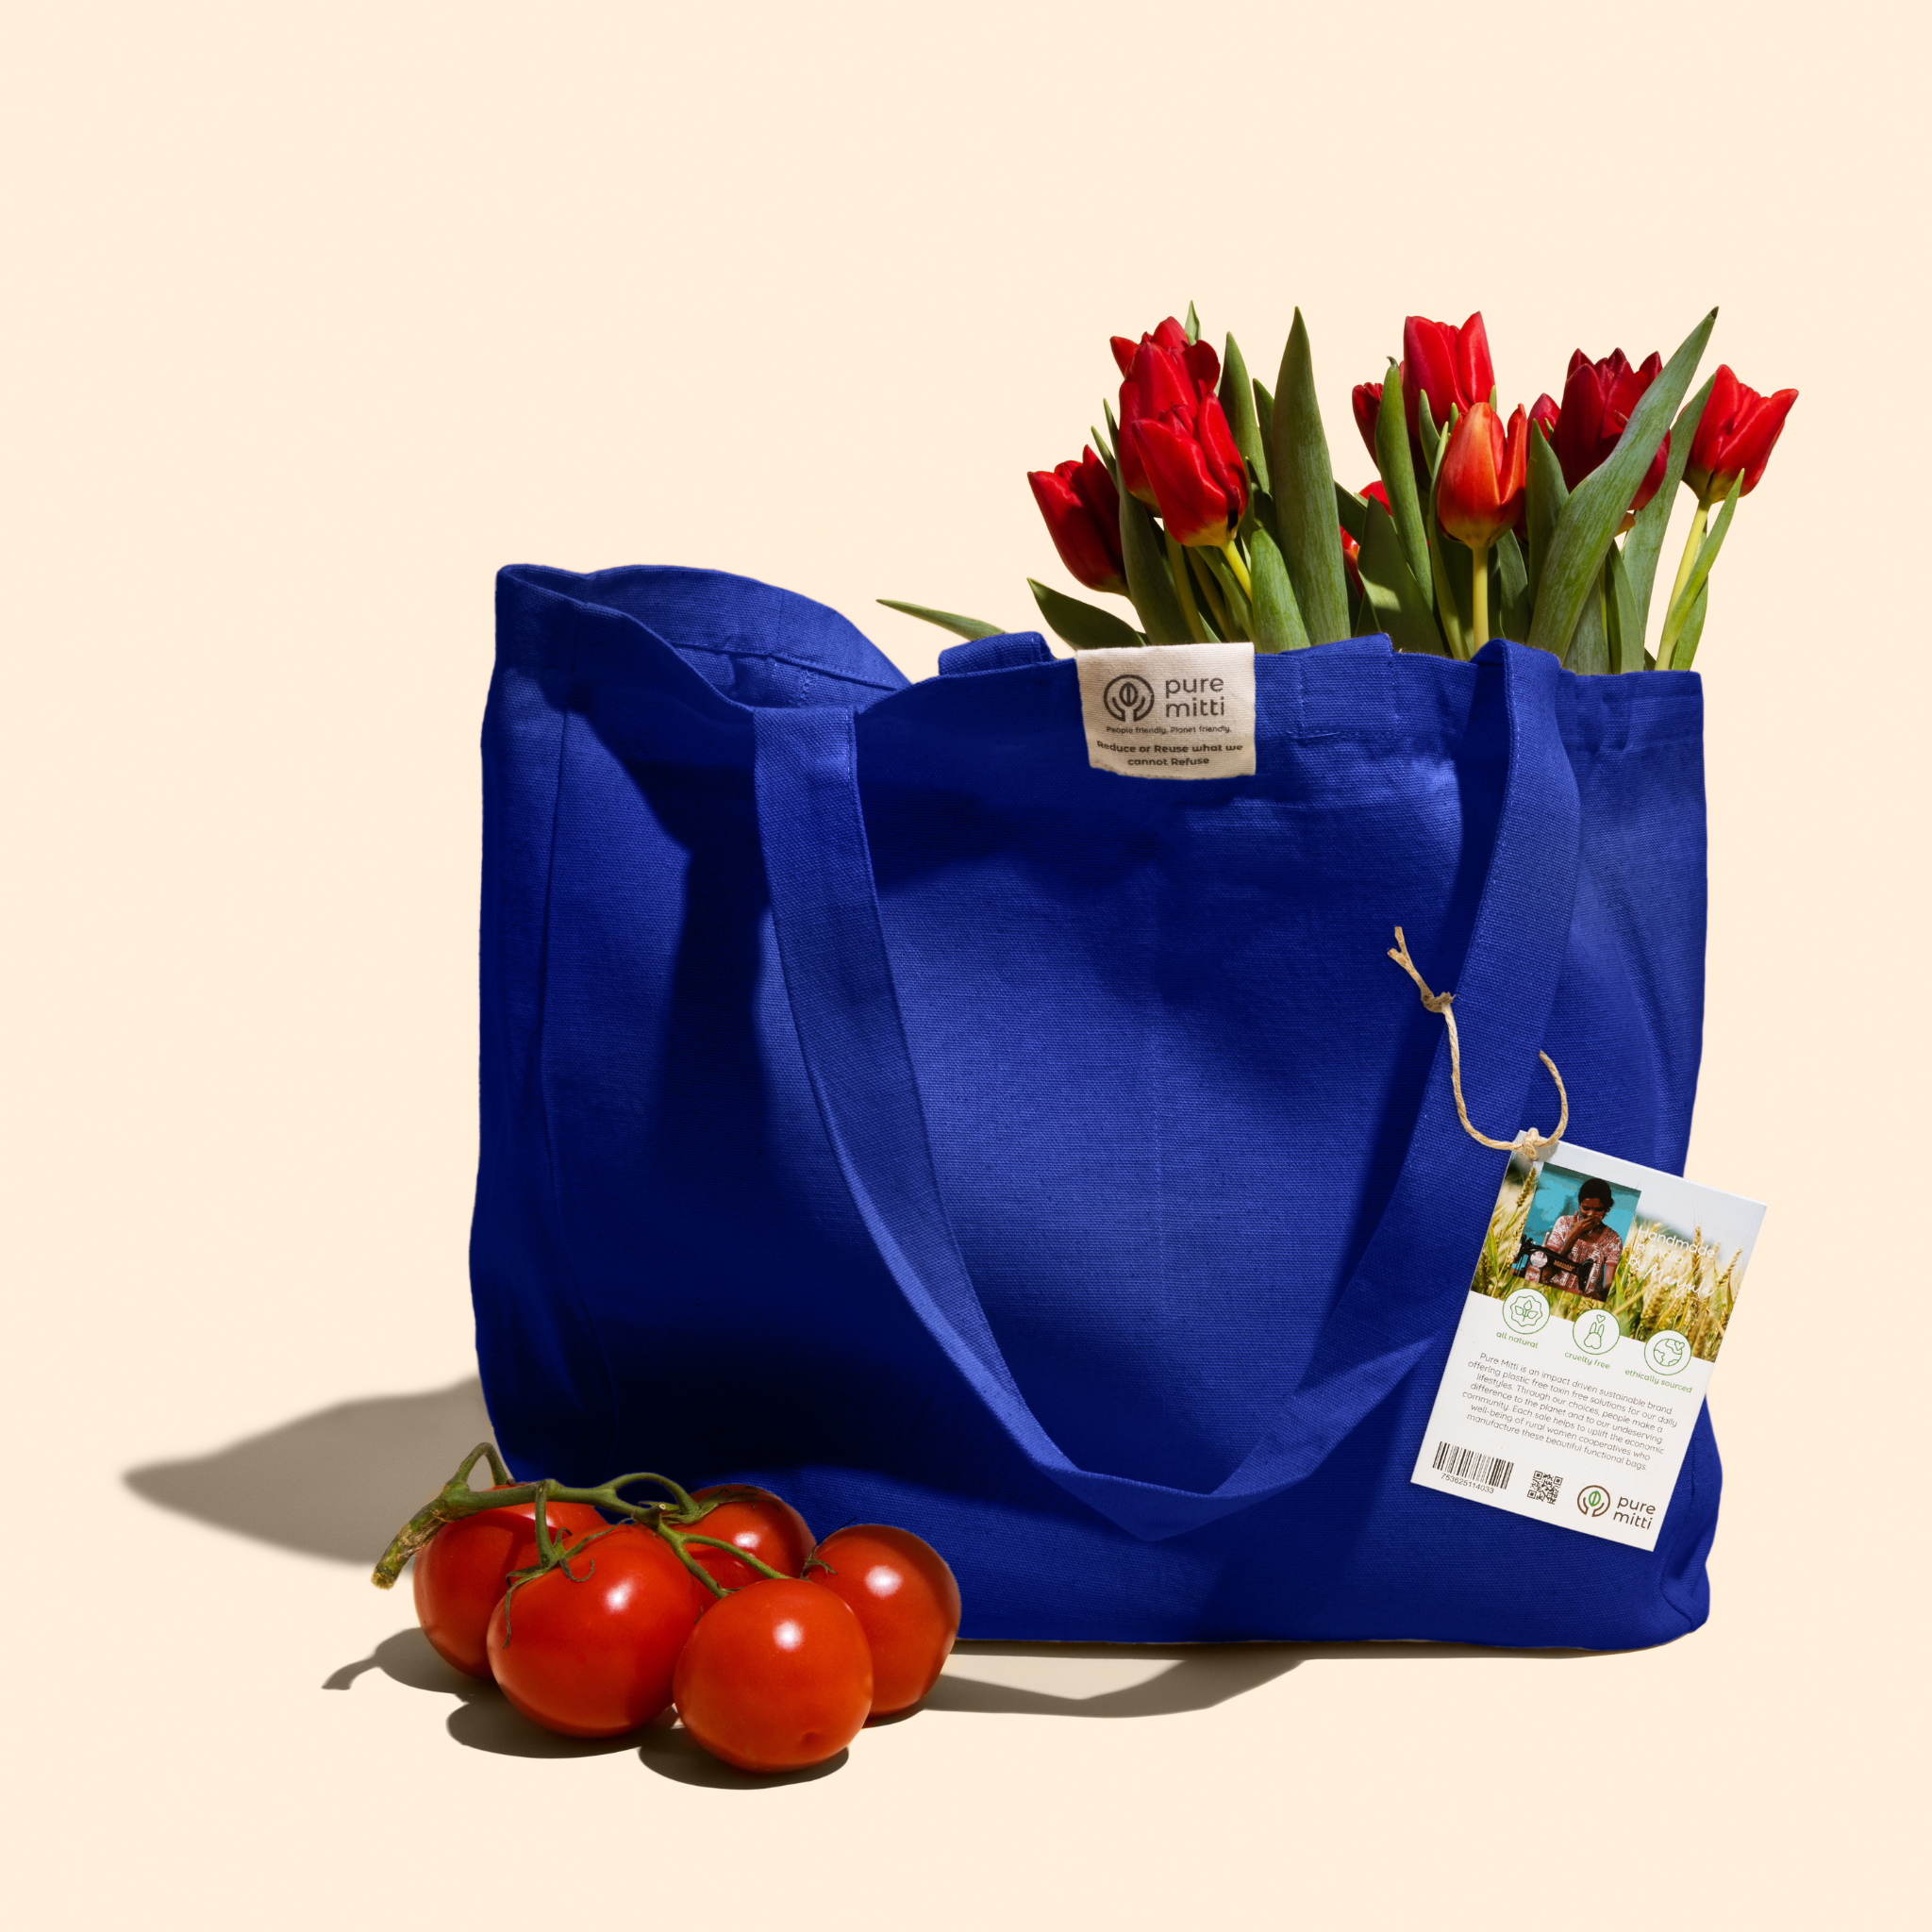 Cotton Bags Manufacturer In India Cotton Bags India Cotton Tote  Cotton  Bags Suppliers  Wholesalers in Delhi India